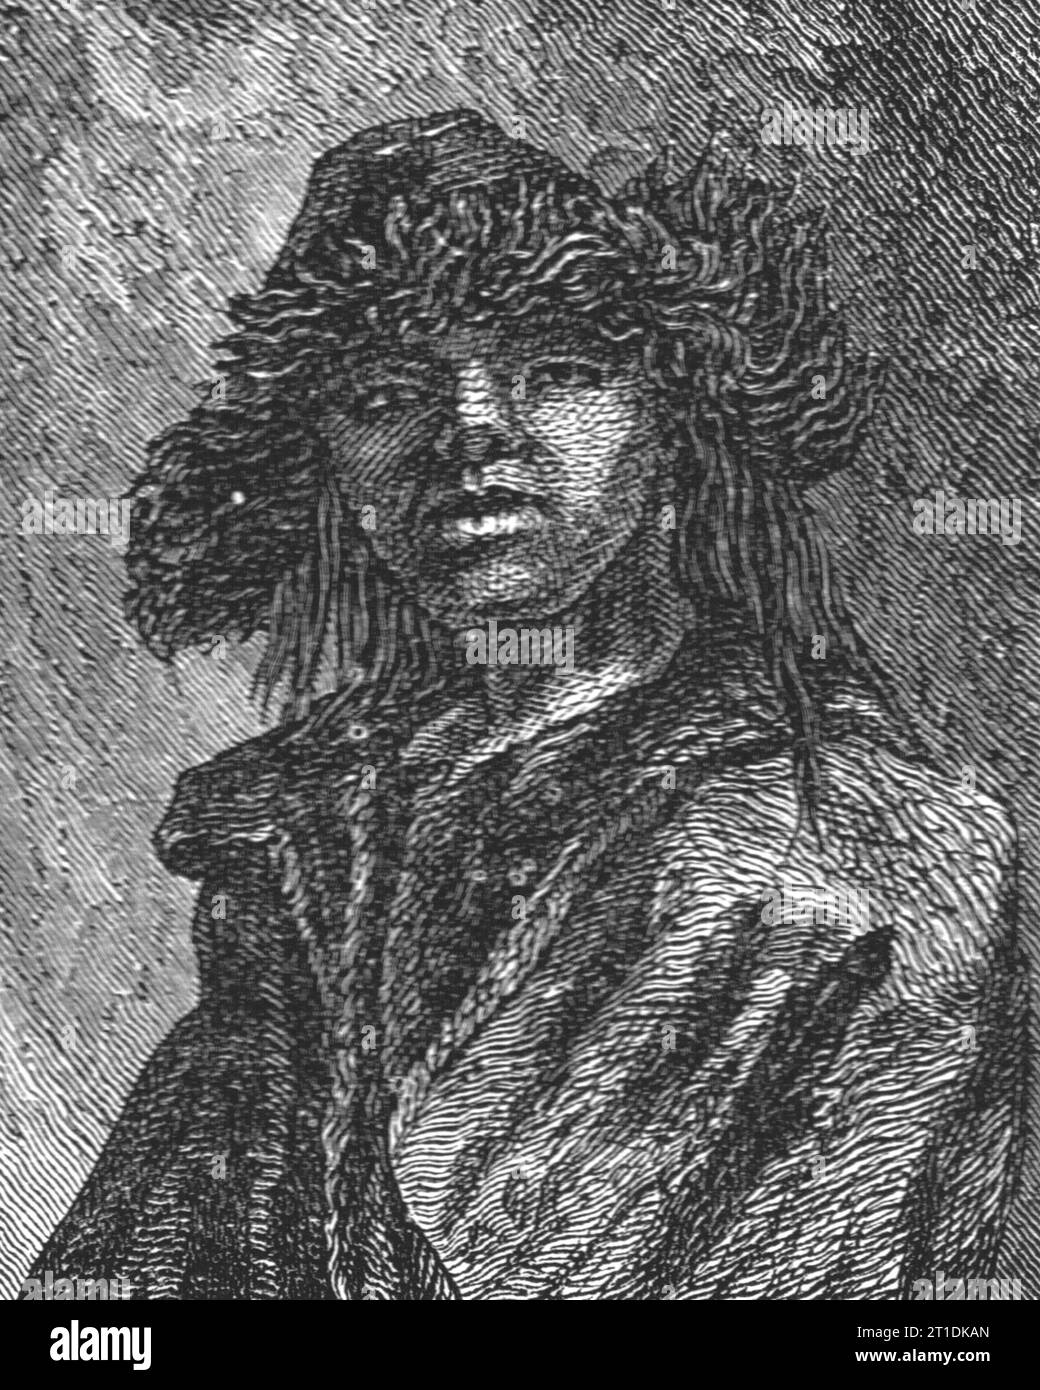 'Young Peasant of Livonia; The Baltic Provinces of Russia',1875. From 'Illustrated Travels' by H.W. Bates. [Cassell, Petter, and Galpin, c1880, London] and Galpin. Stock Photo